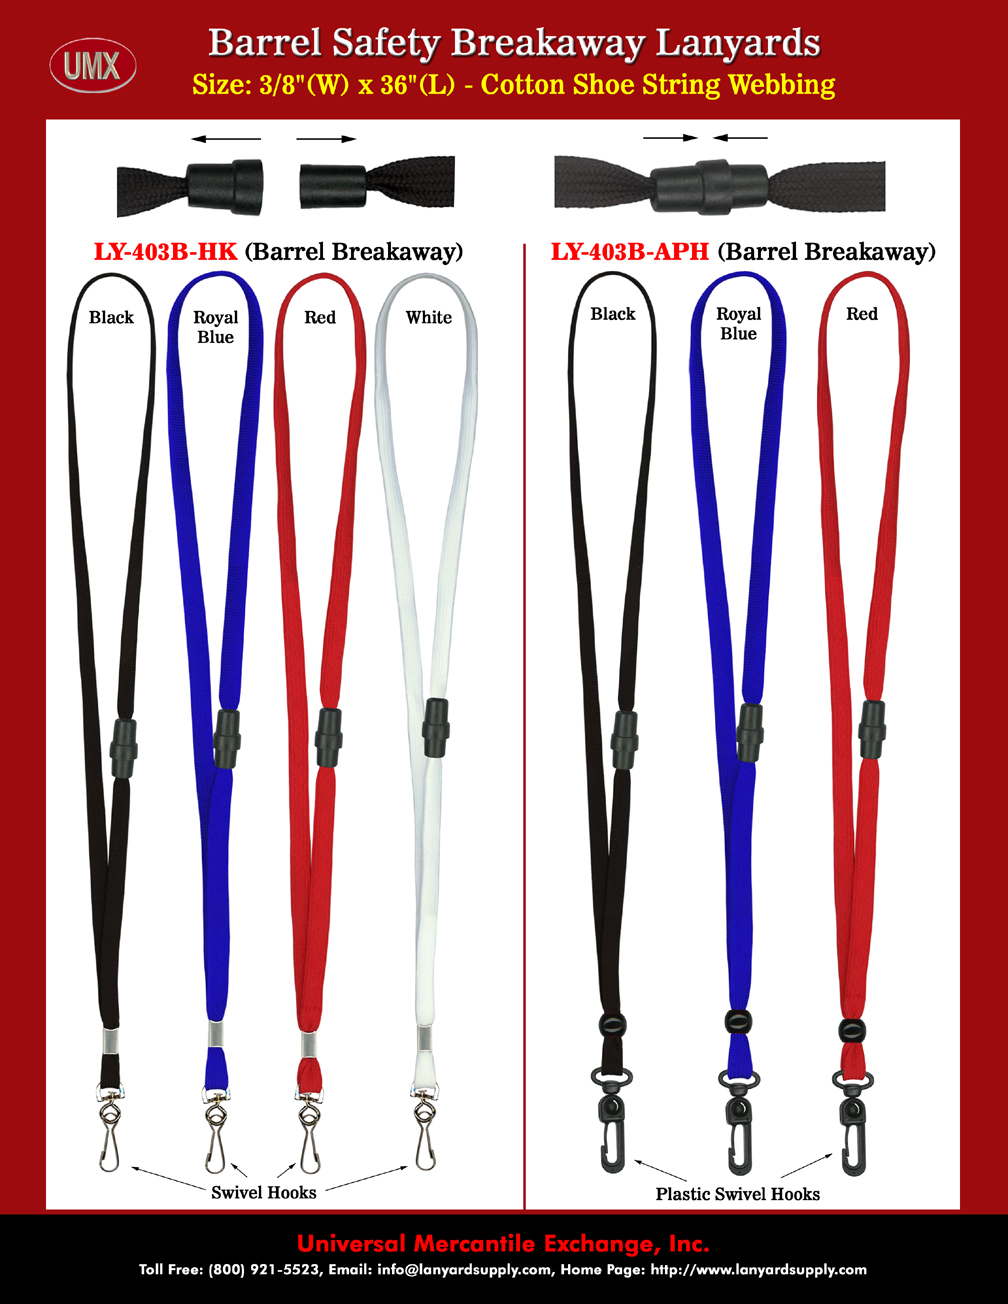 Low Cost Non-Metal 3/8" Safety Lanyards